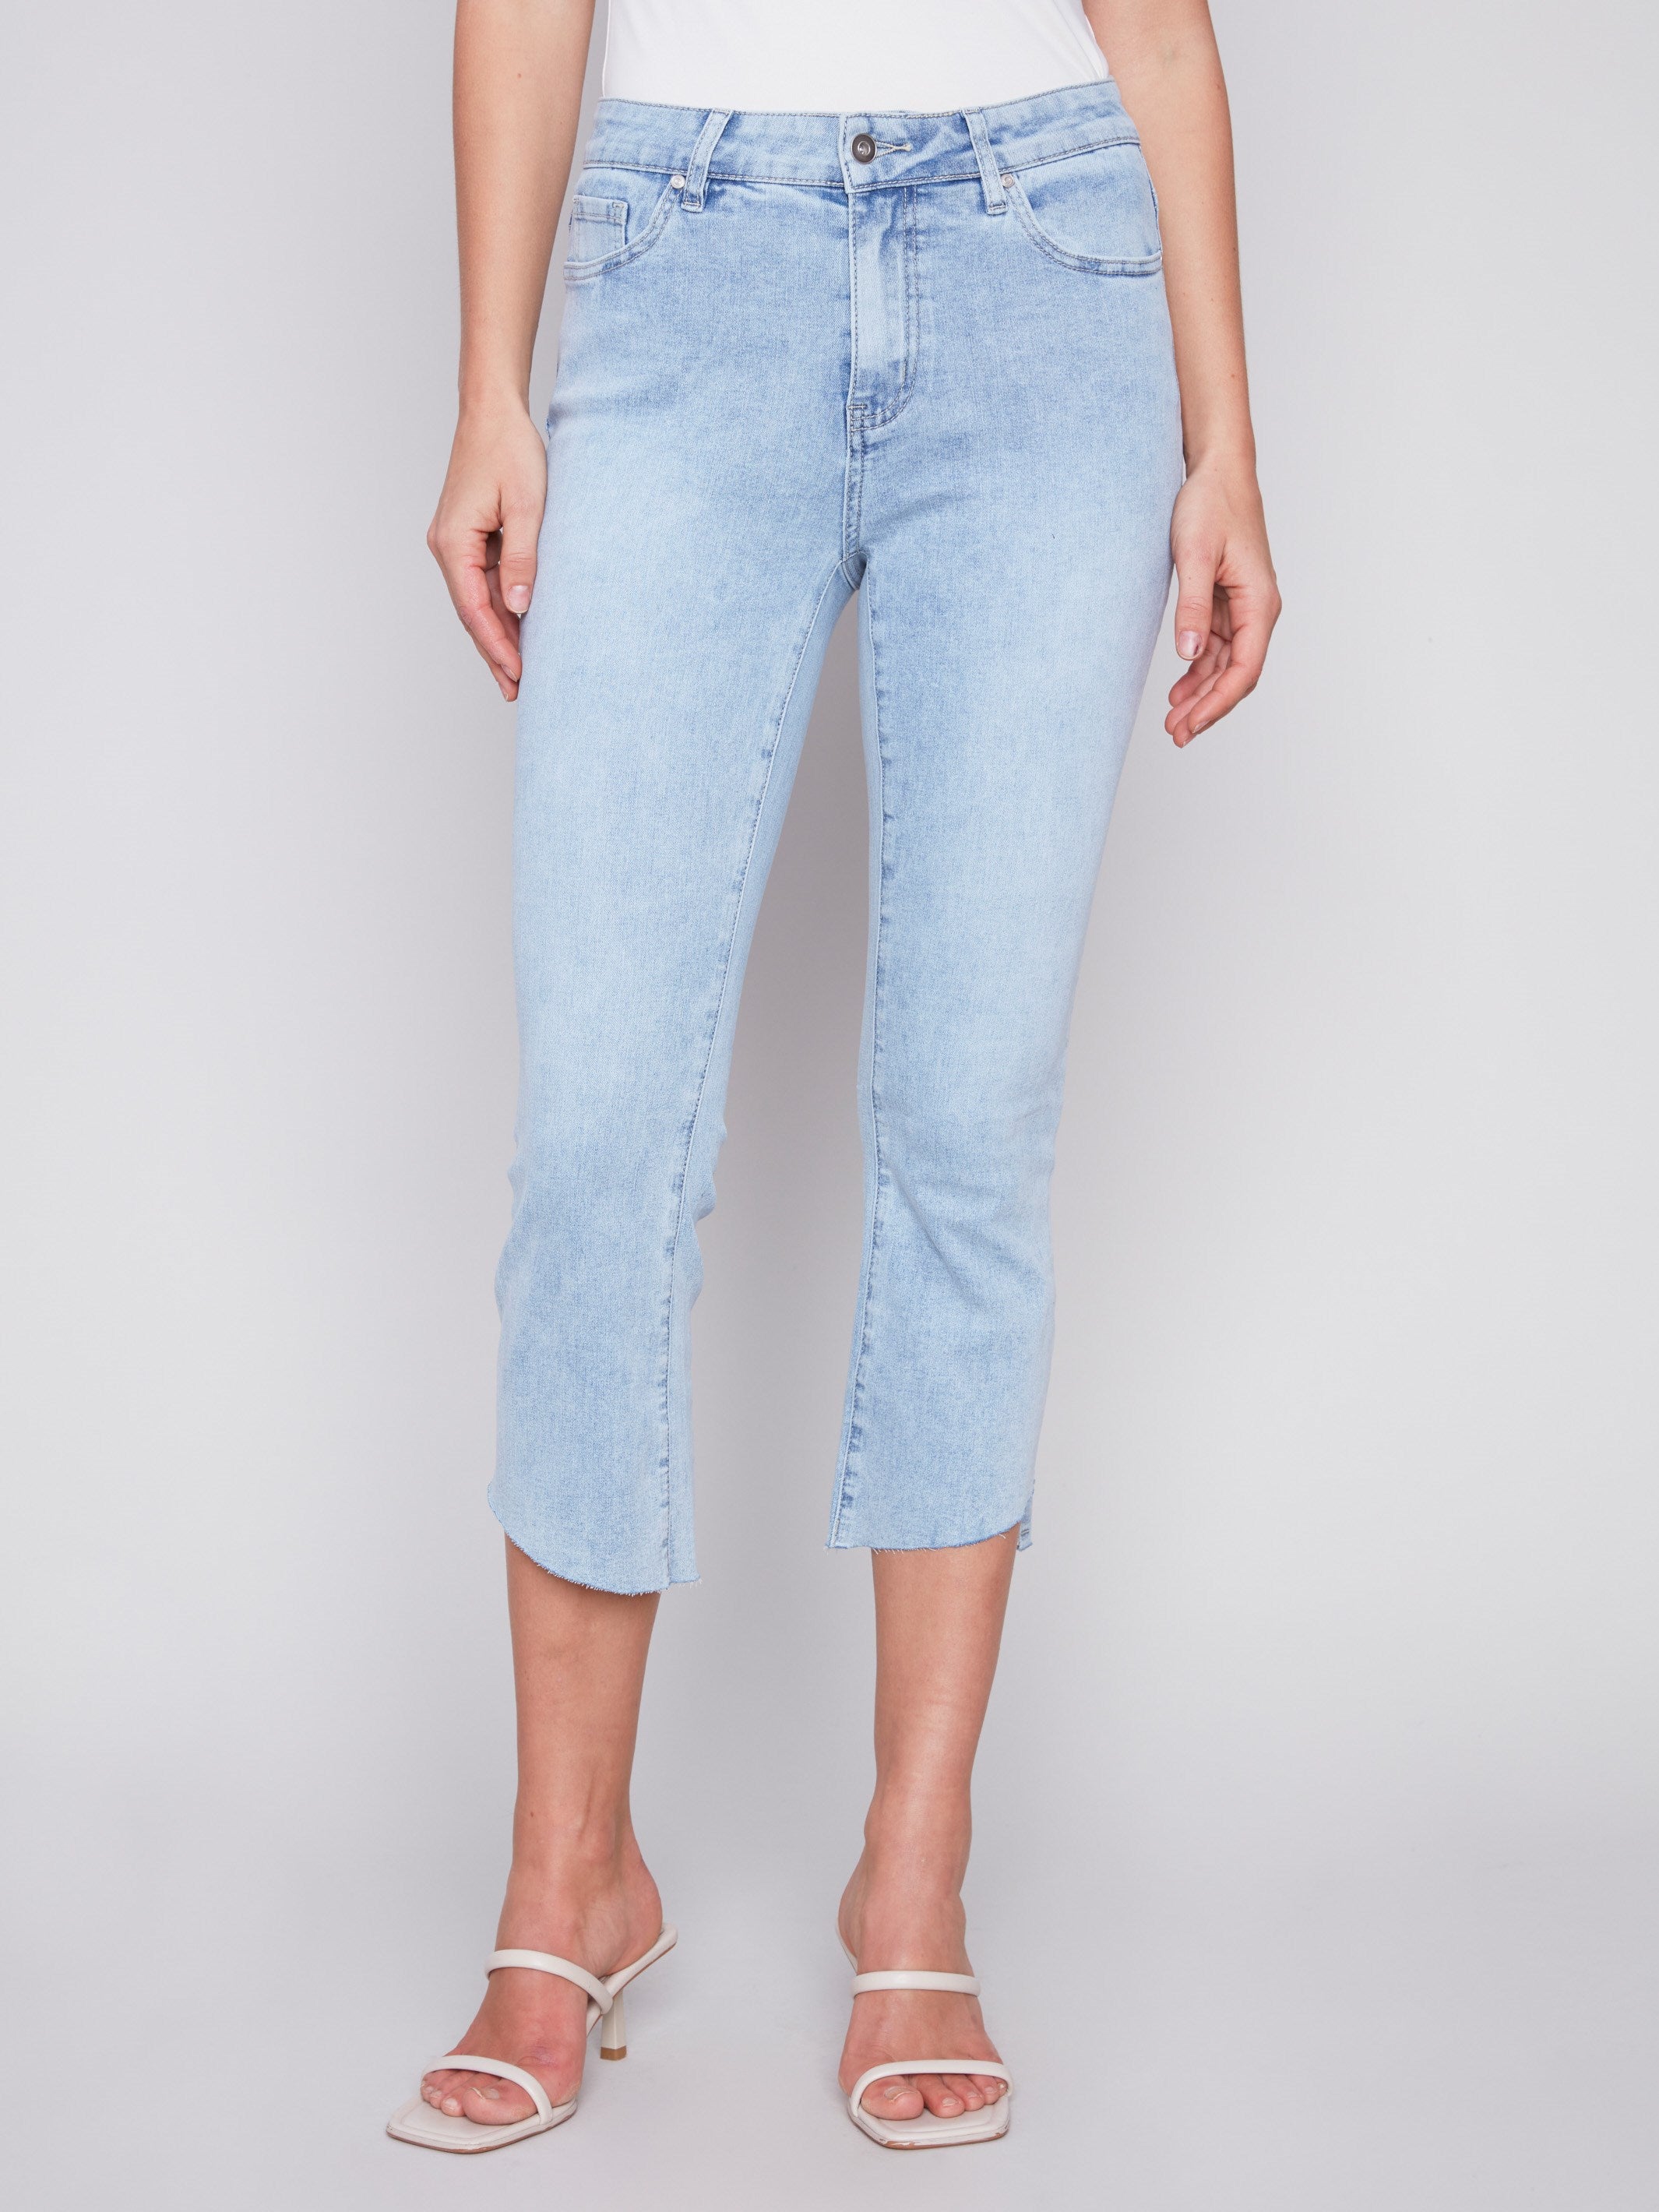 Cropped Bootcut Jeans with Asymmetrical Hem - Bleach Blue - Charlie B Collection Canada - Image 2